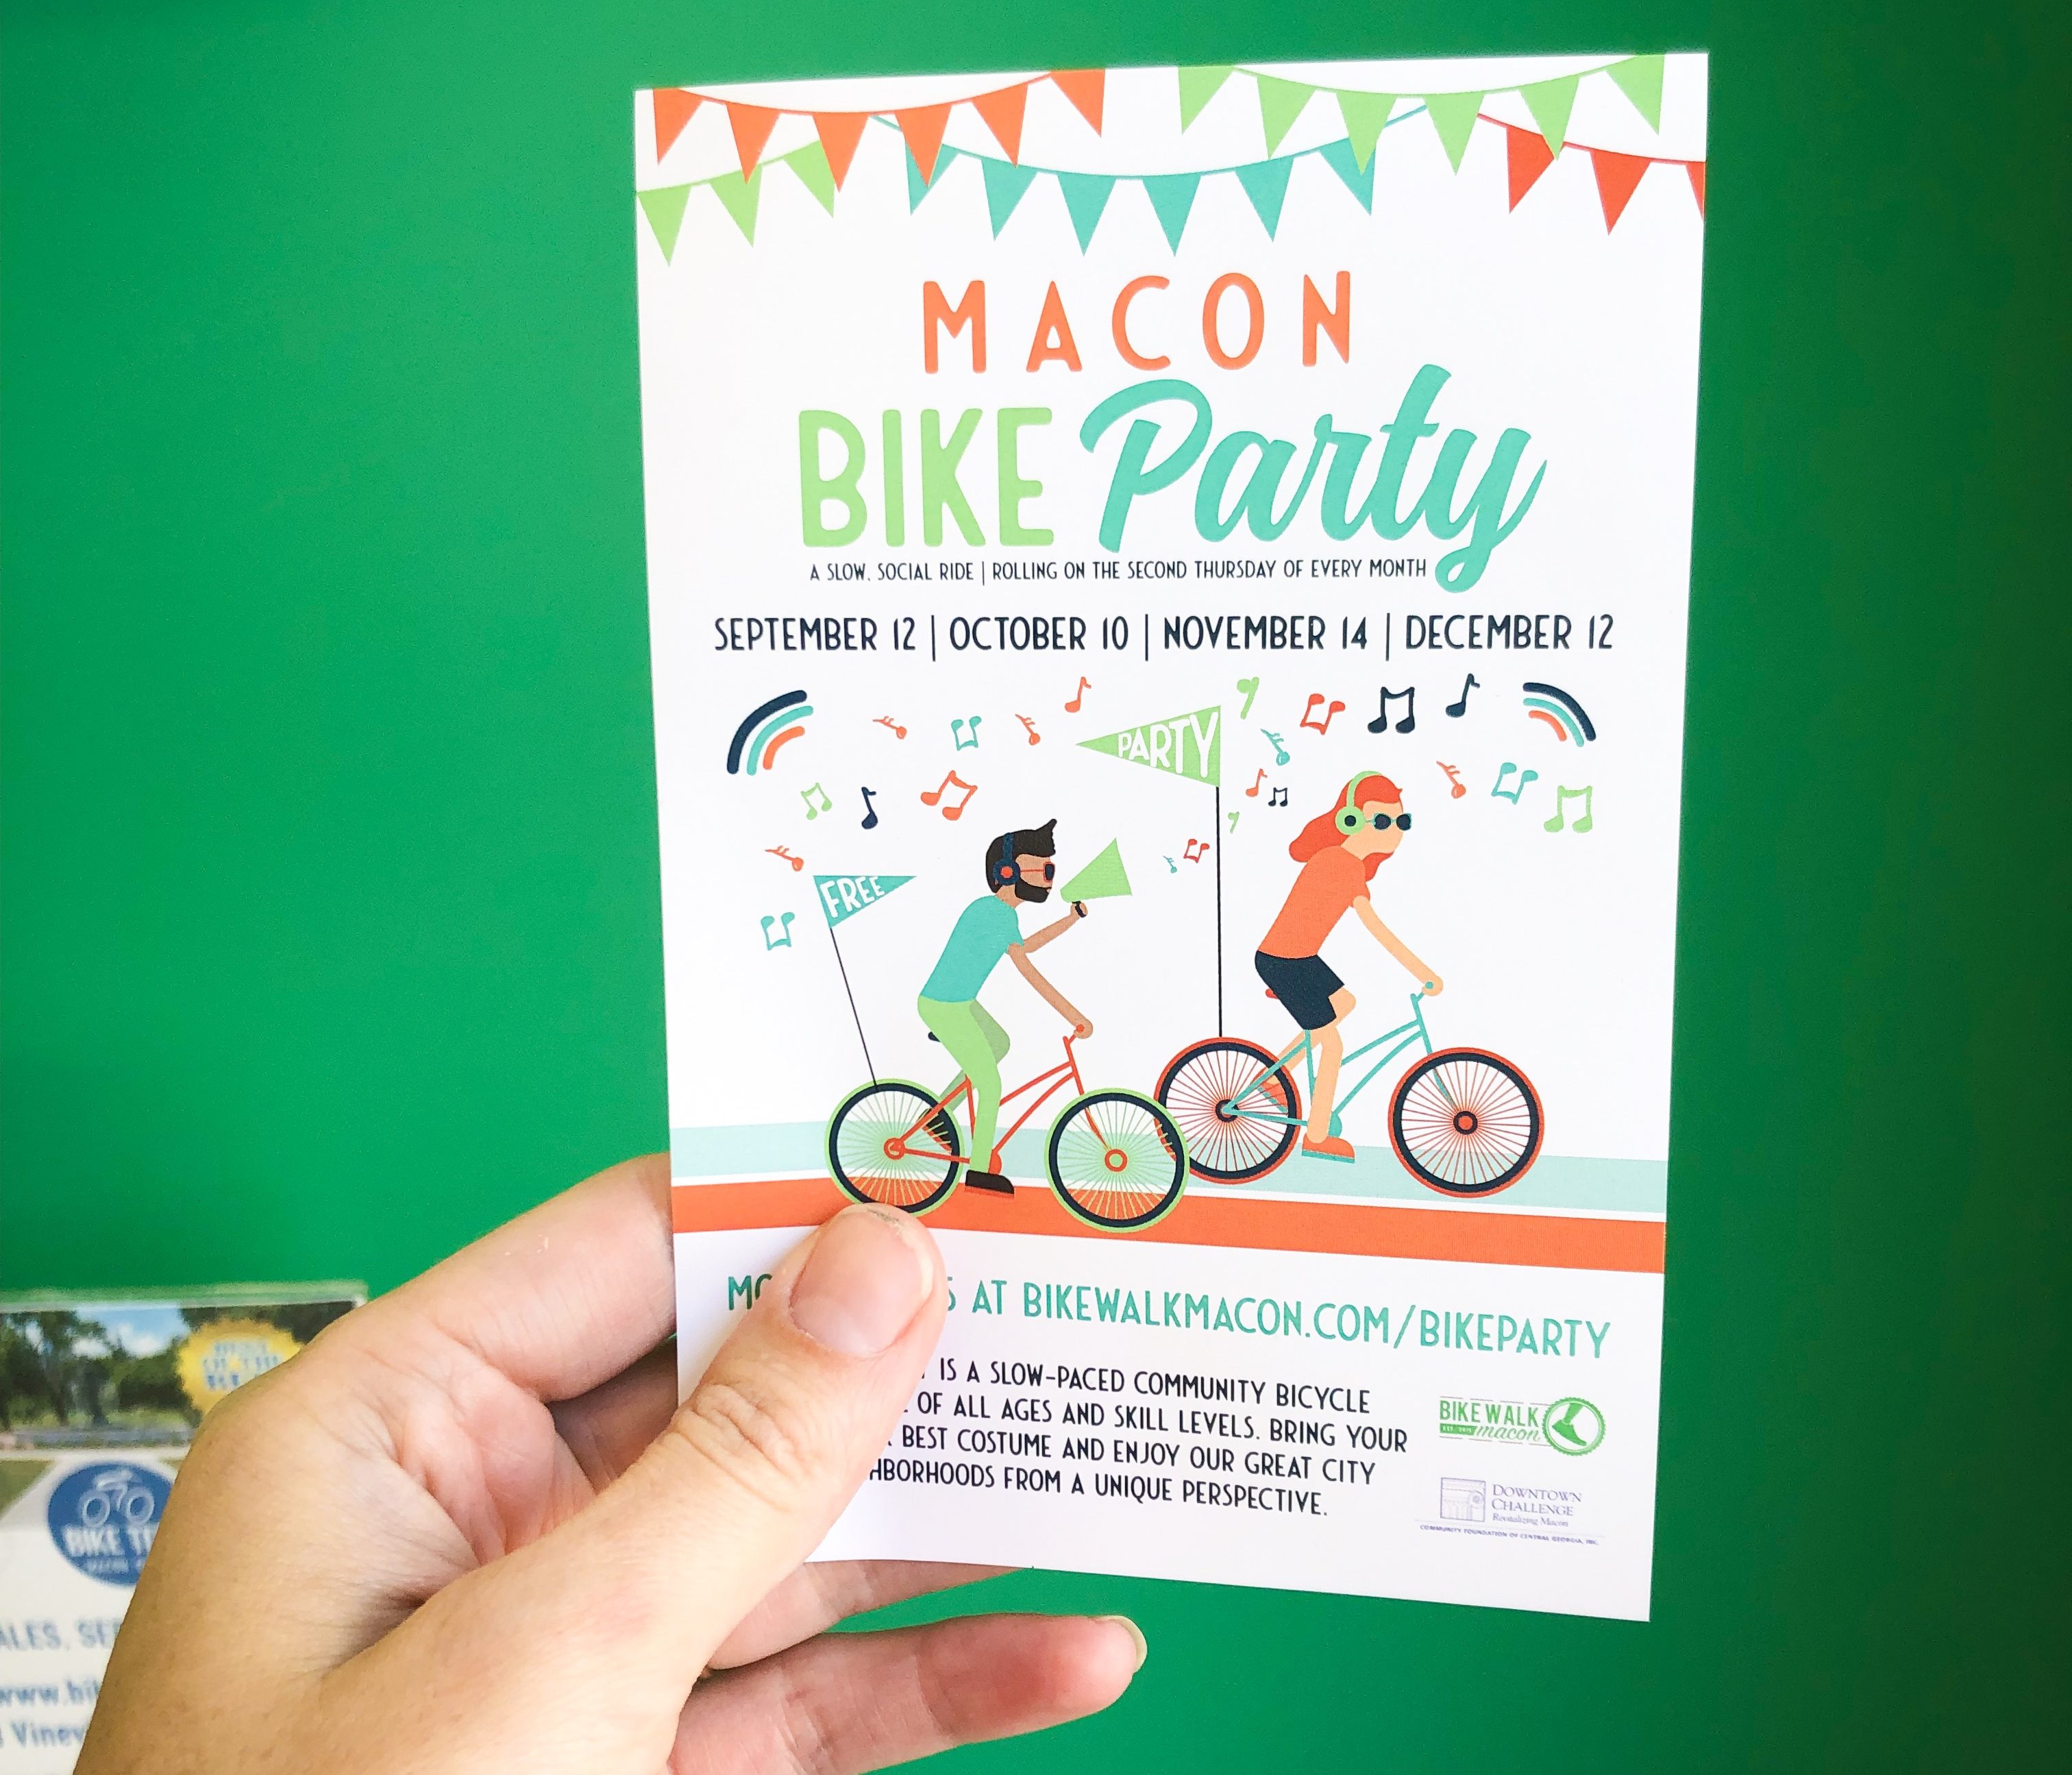 photo of hand holding a 'Macon Bike Party' flyer for Bike Walk Macon